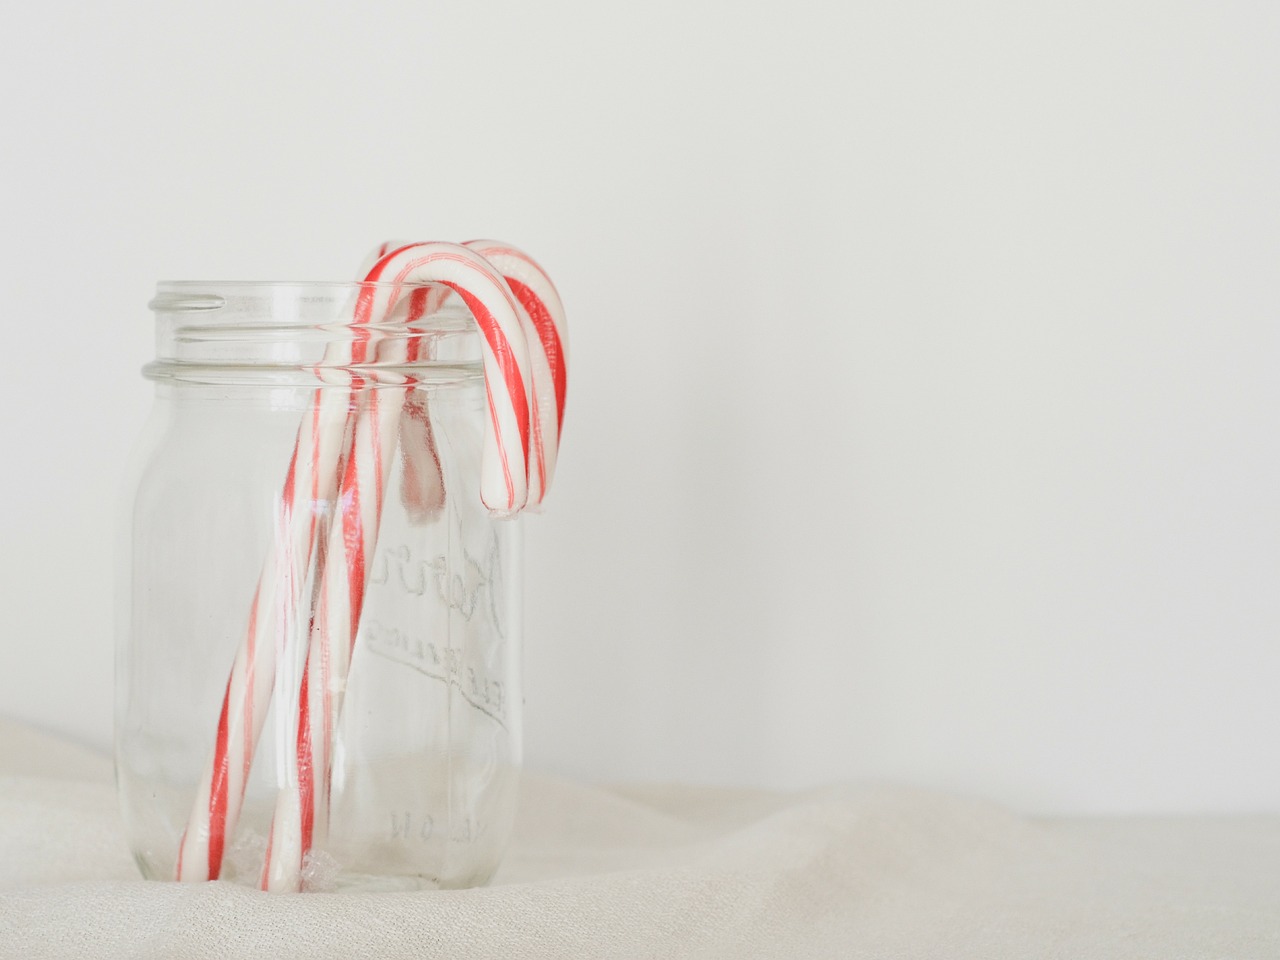 candy canes simple red free photo